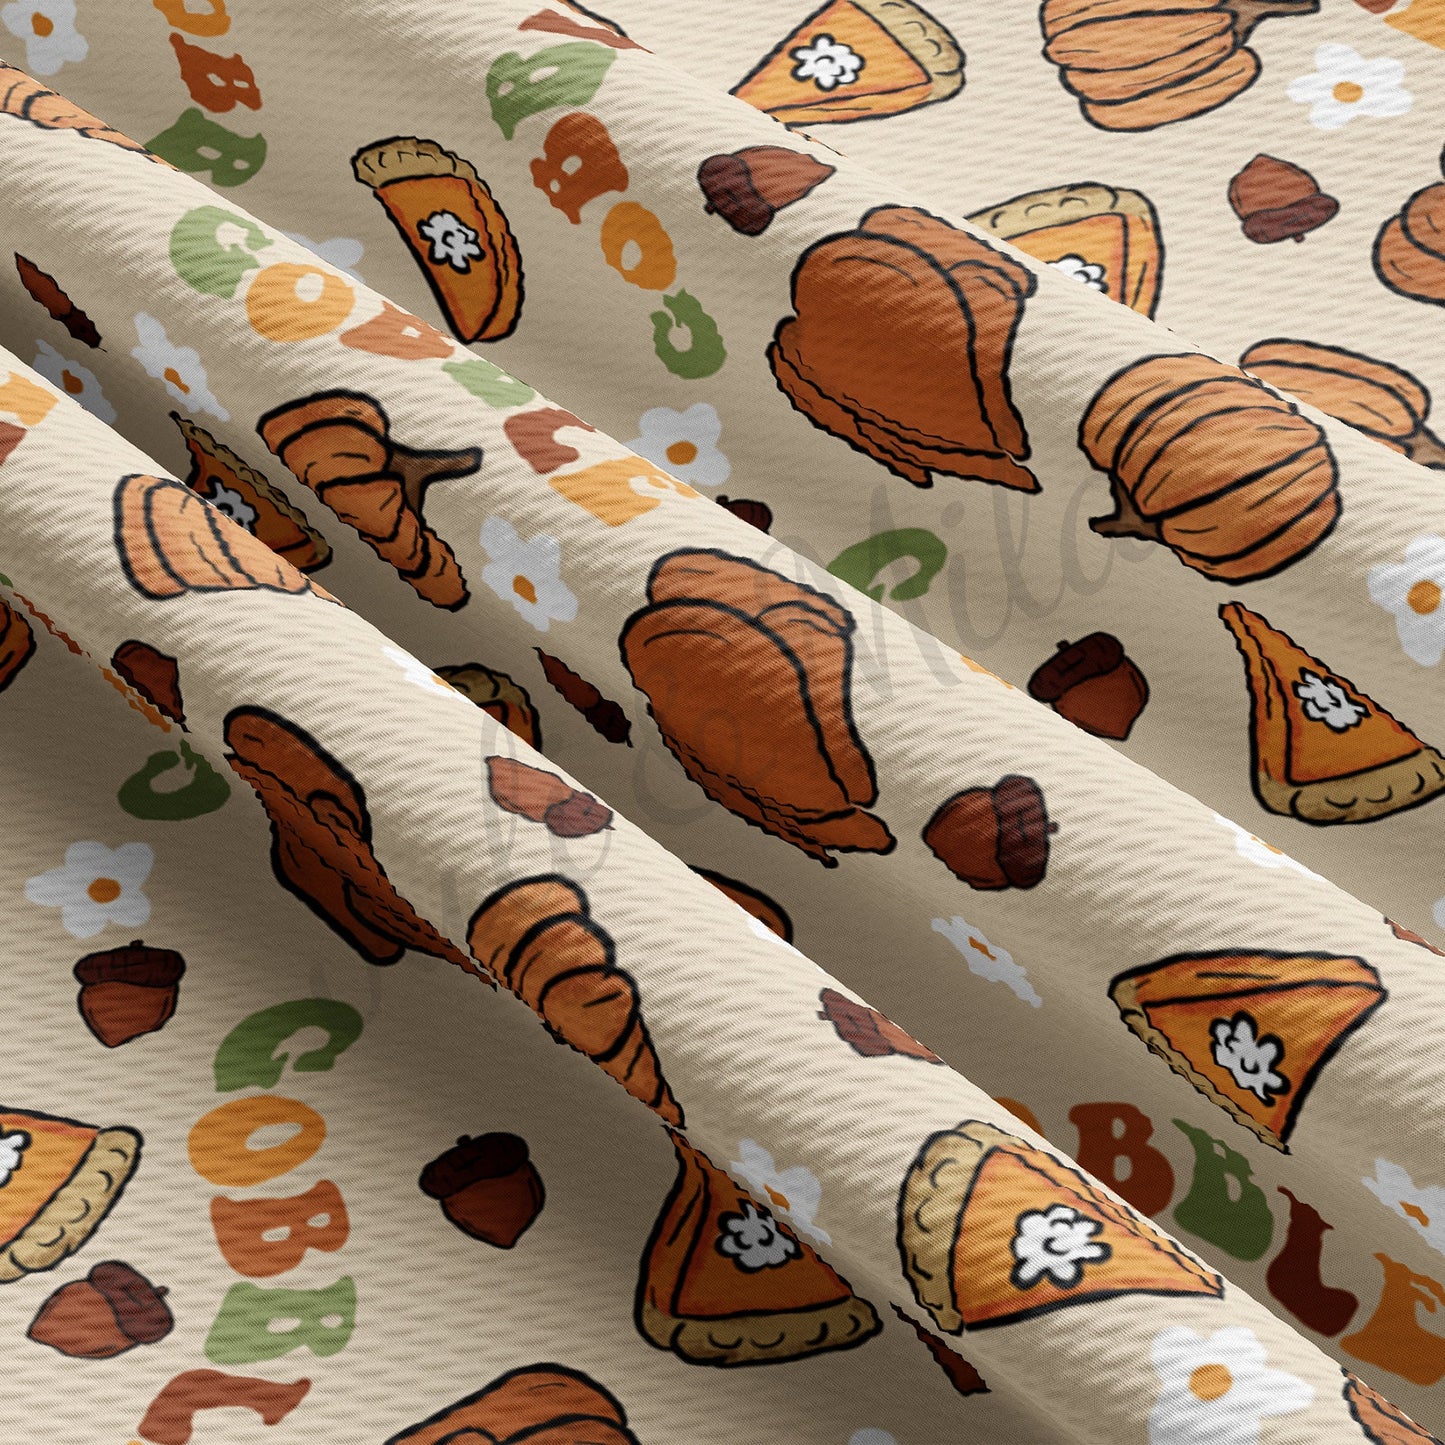 Gobble Thanksgiving Bullet Fabric AA456